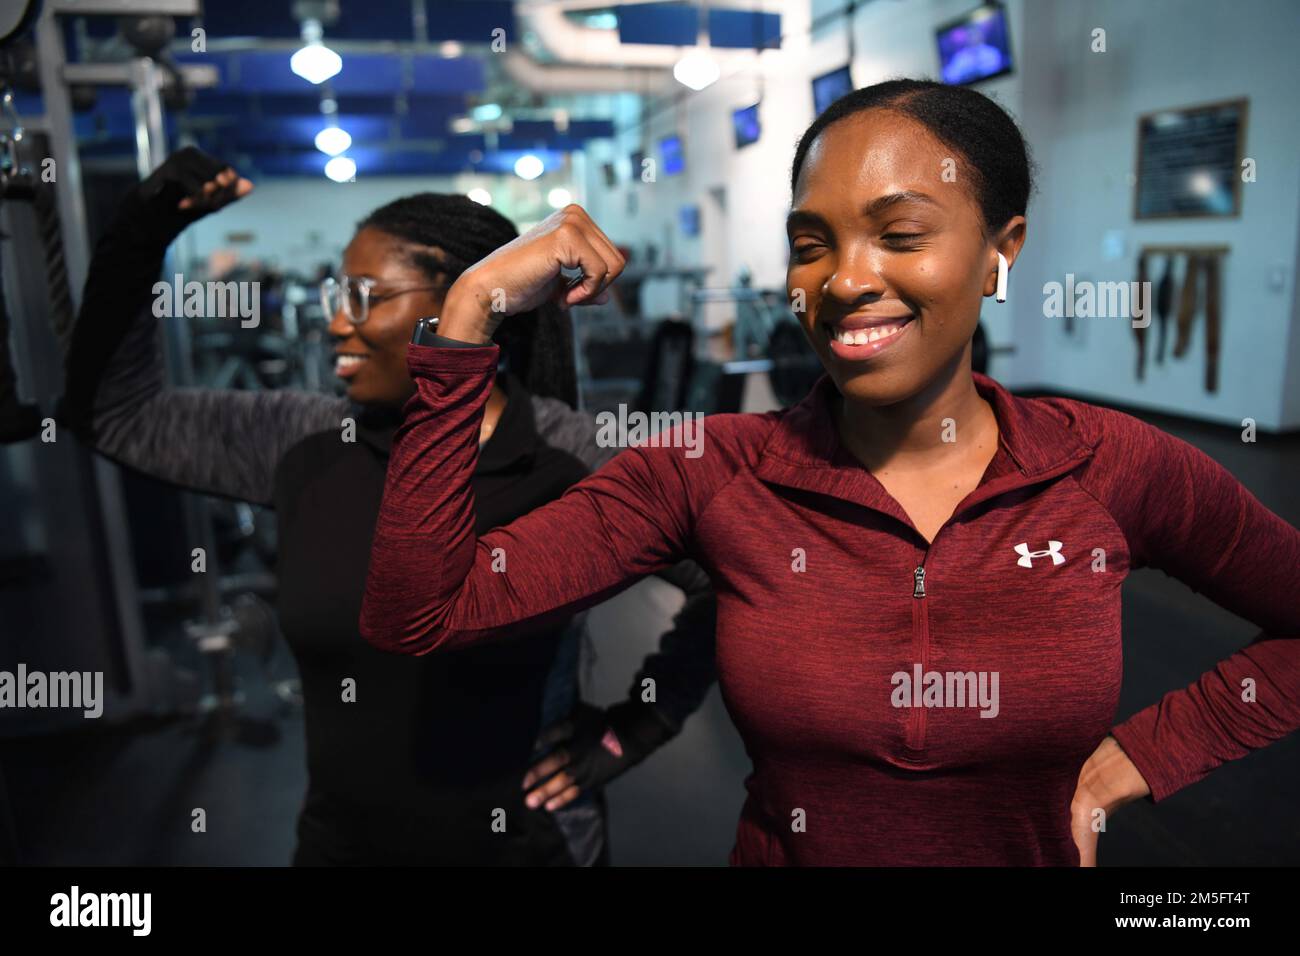 Senior Airman Jimara Palmer, missile security operator at the 890th Missile Security Forces Squadron (left), and Senior Airman Lashonda Schlis, flight security controller at the 890th Missile Security Forces Squadron (right), pose while working out at F.E. Warren Air Force Base, Wyoming, March 15, 2022. This image was captured in efforts to bring awareness to international women’s month. Stock Photo